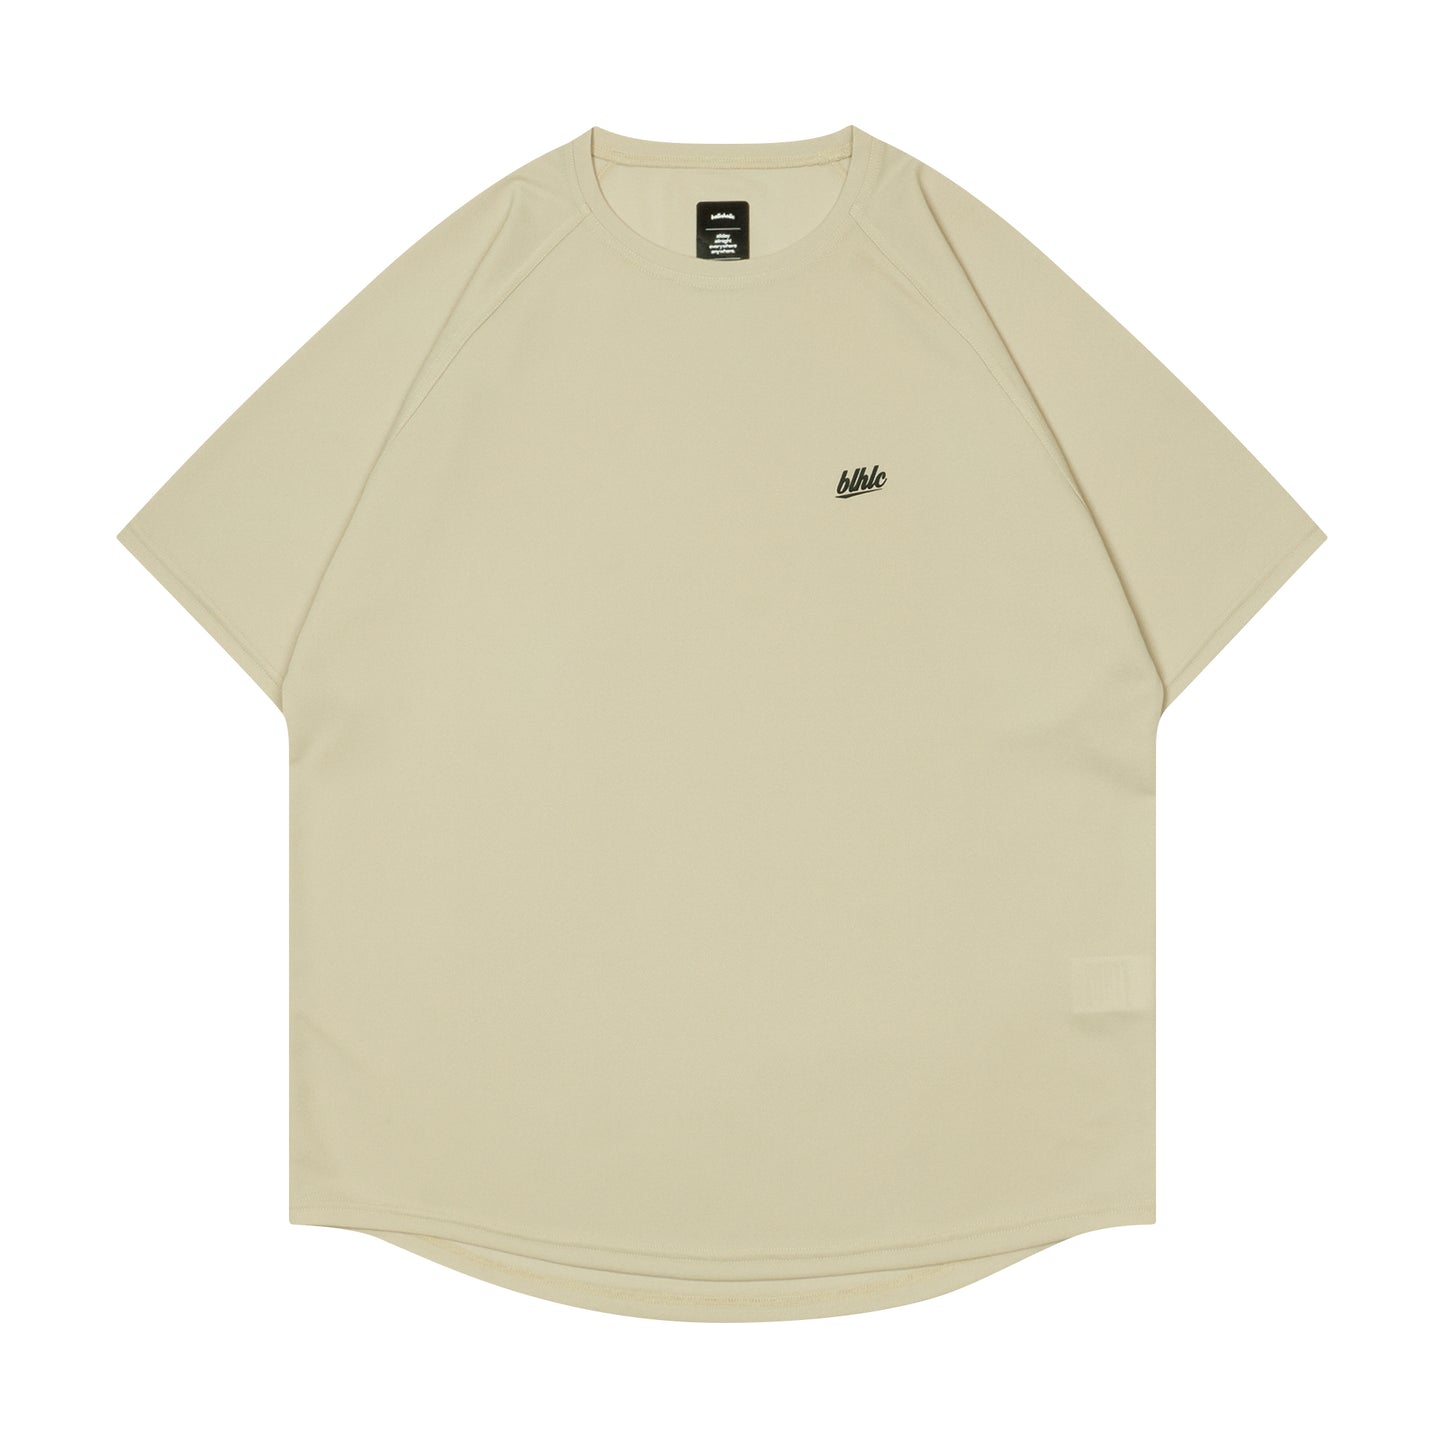 blhlc Cool Tee (oatmeal/black)